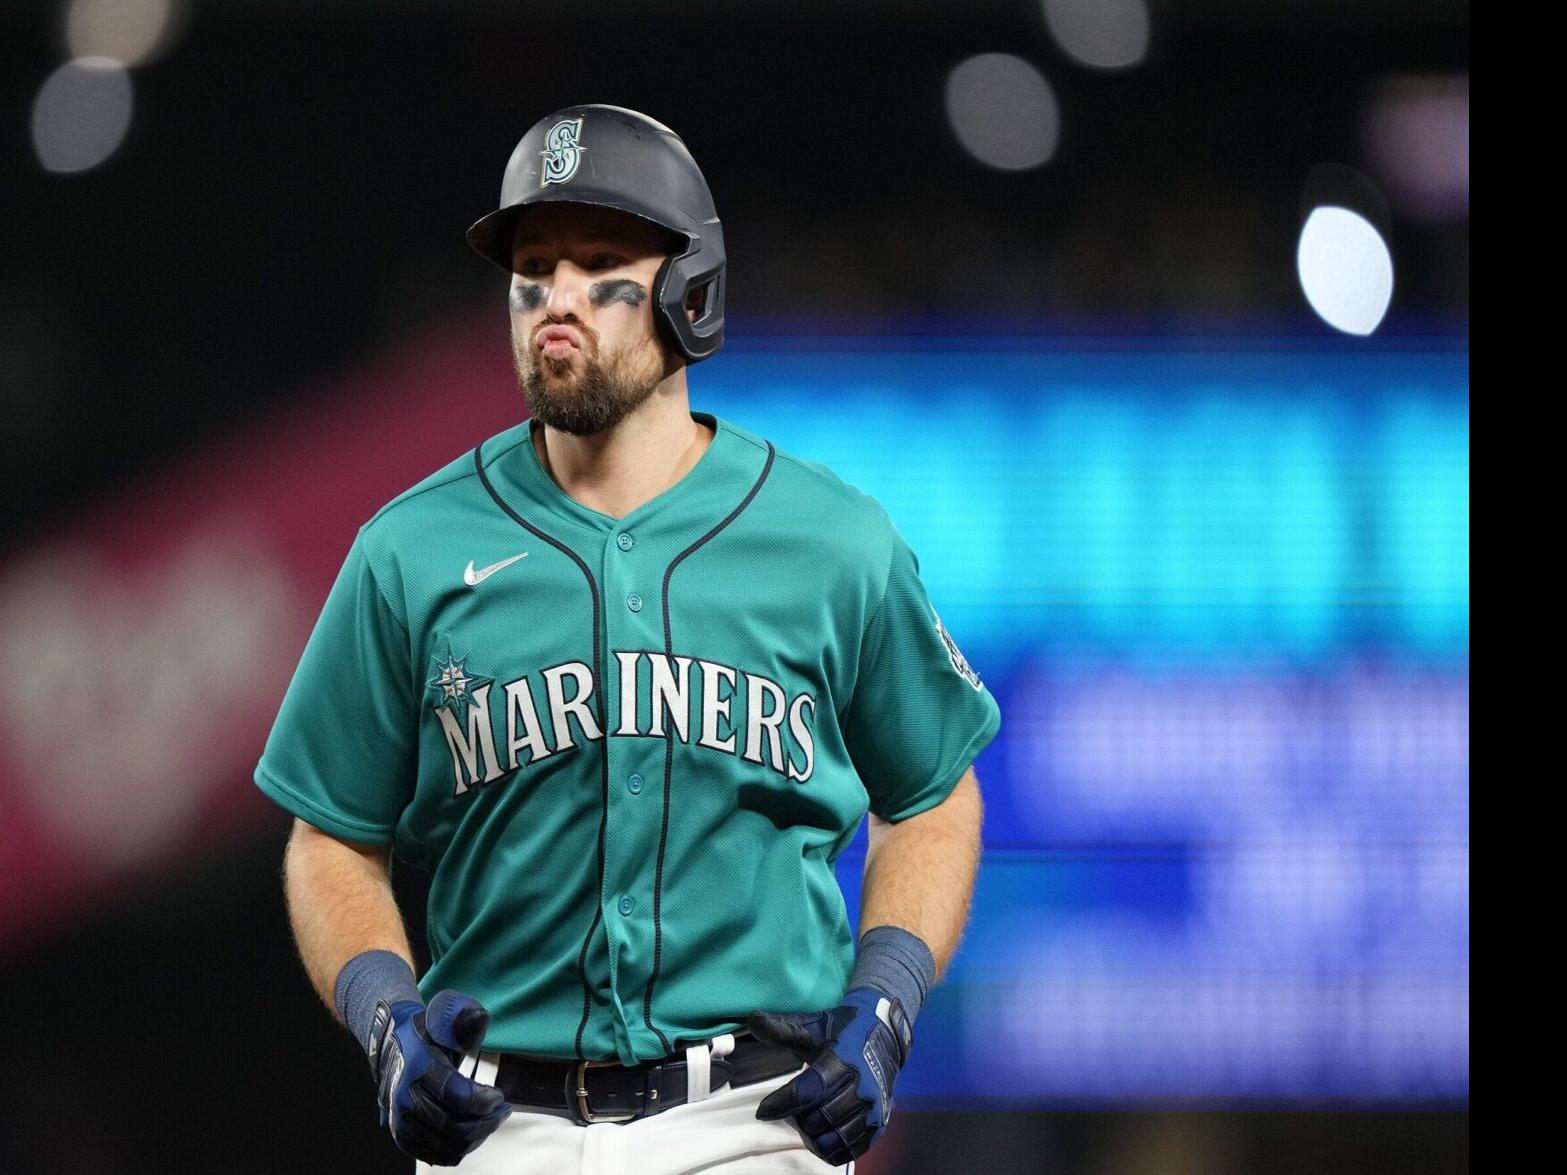 What happened to Texas? How Seattle Mariners surged past - Seattle